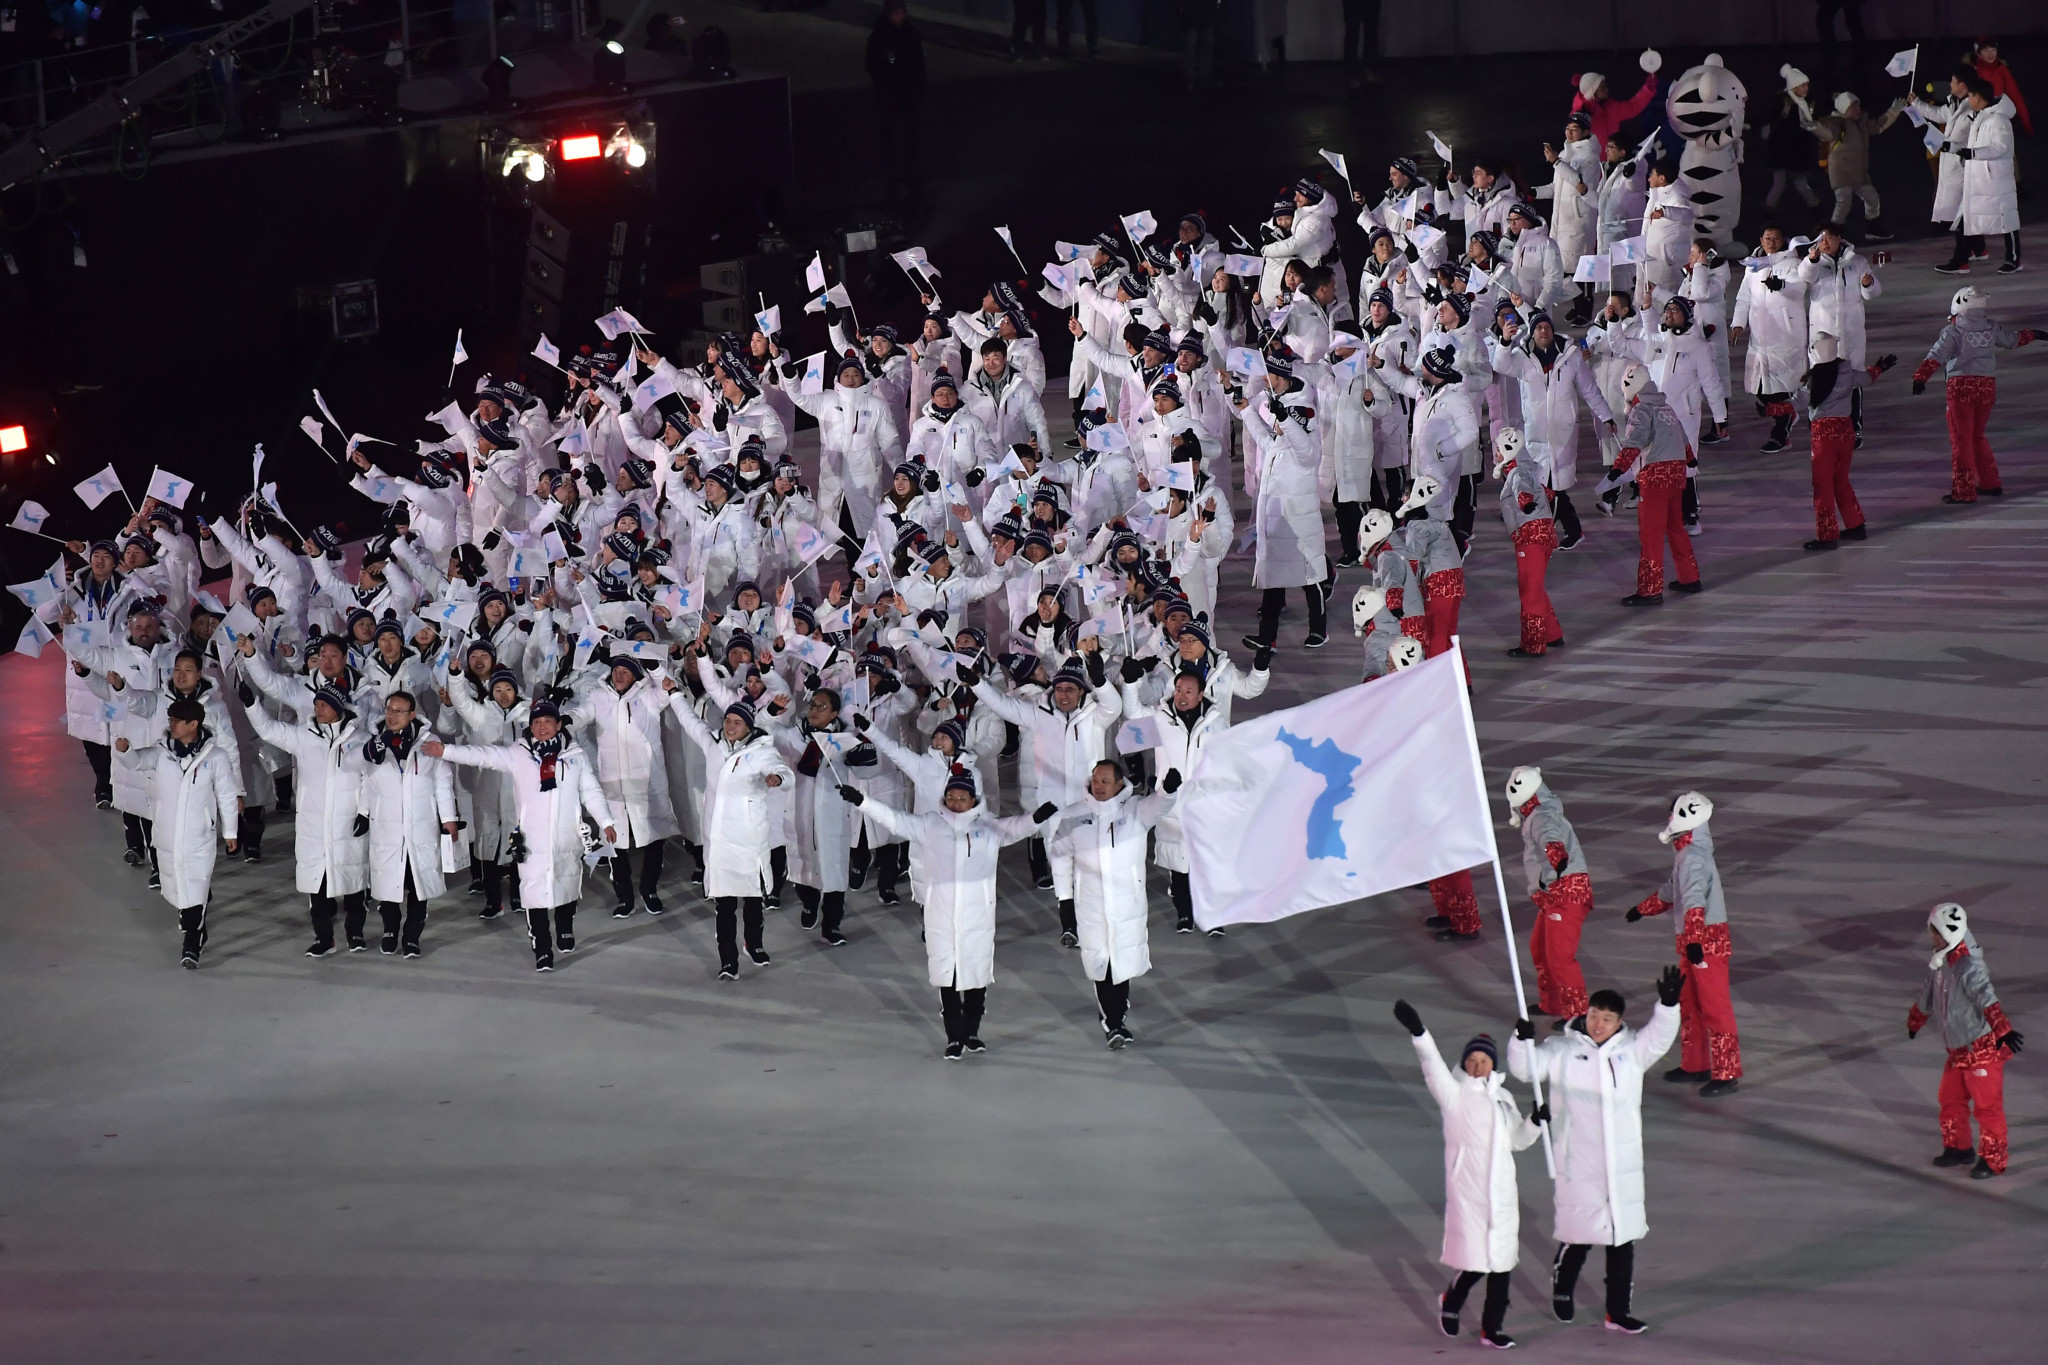 Athletes from North and South Korea marched under a unified flag at the Opening Ceremony of the 2018 Winter Olympic Games in Pyeongchang ©Getty Images